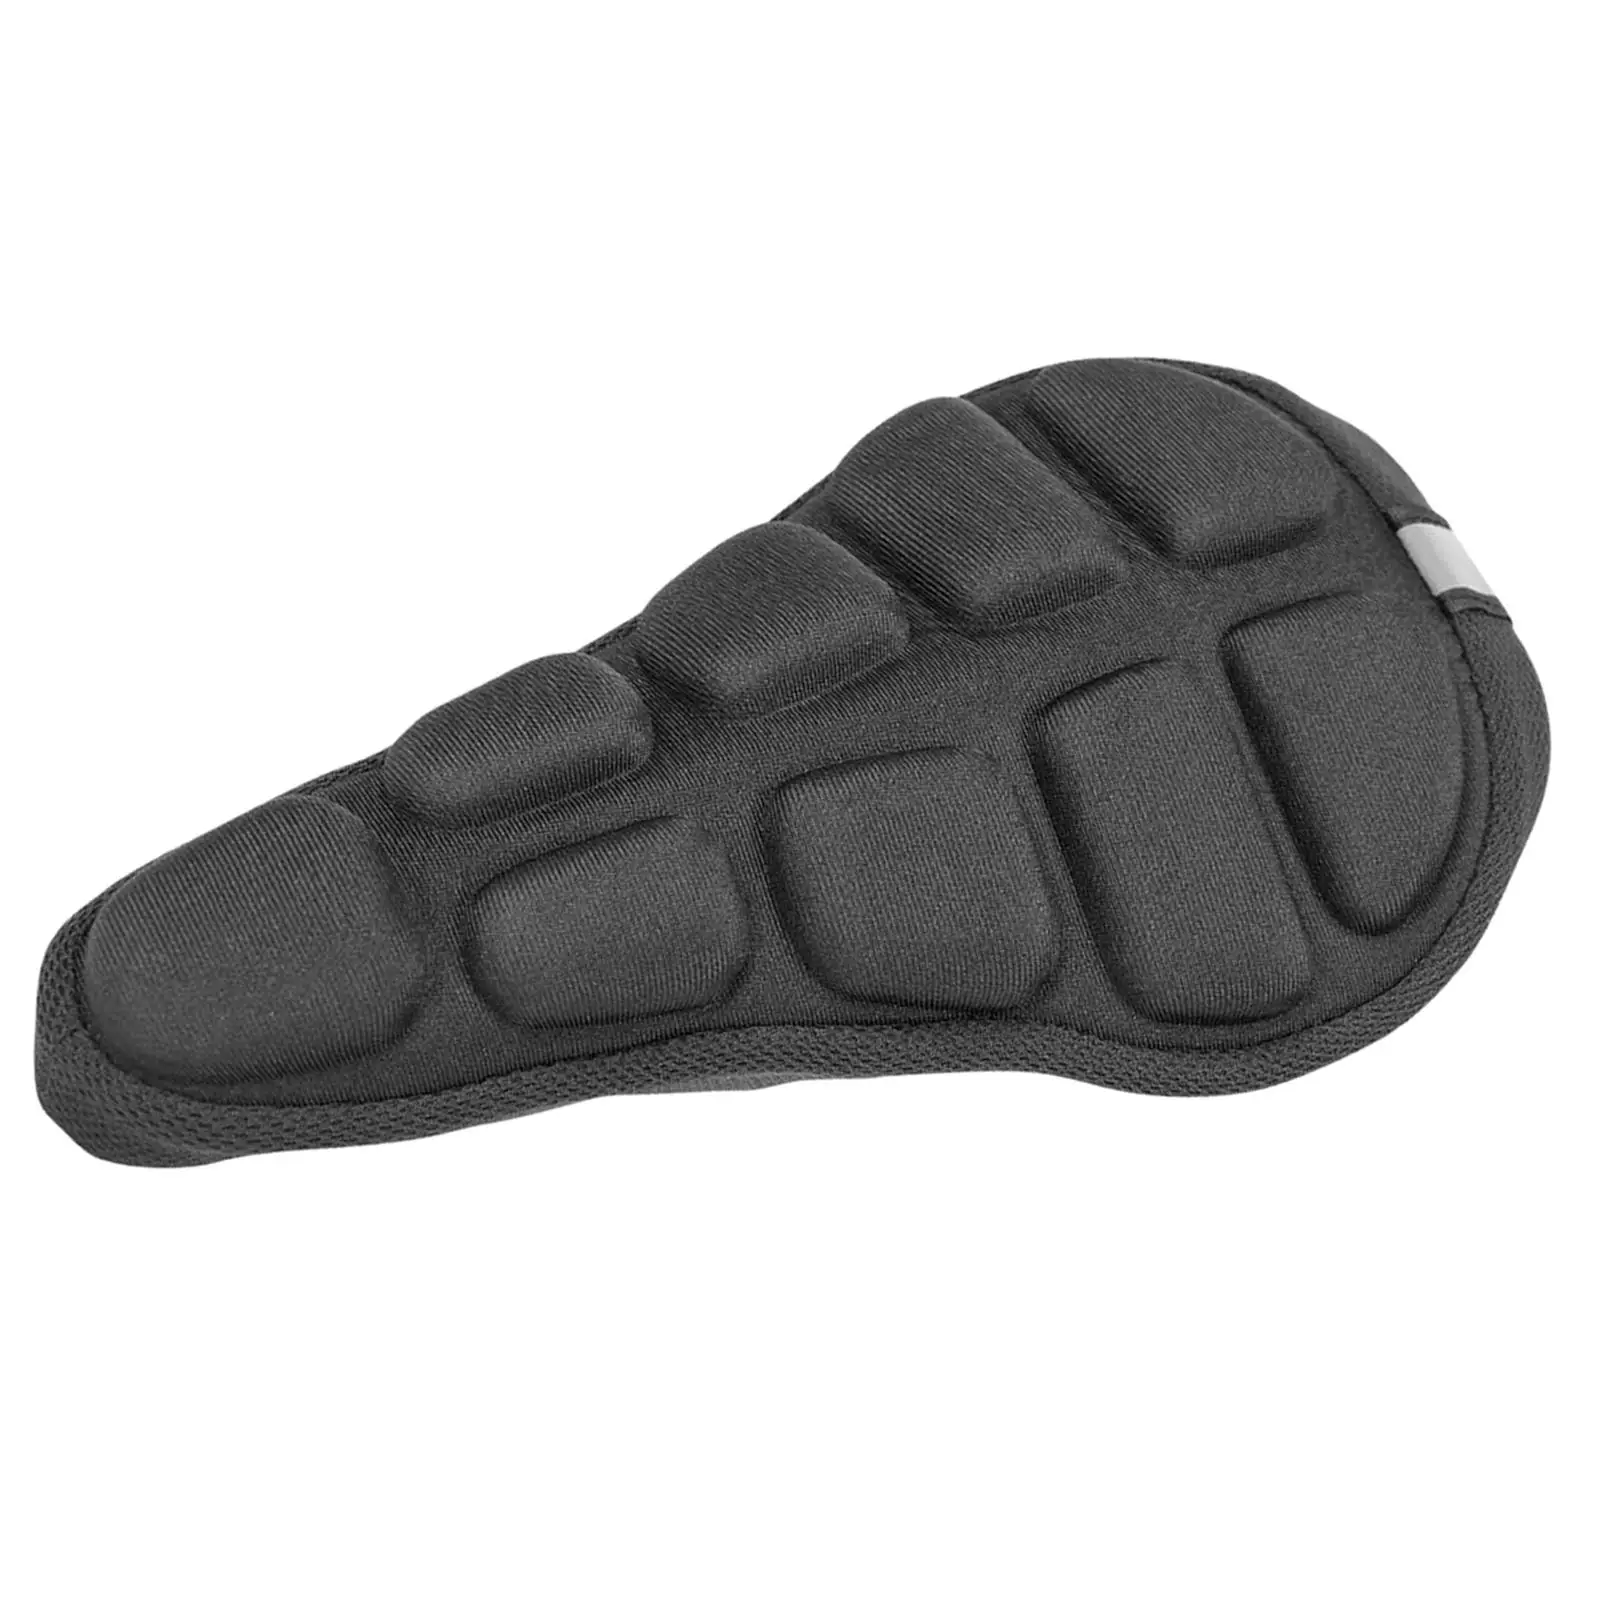 Bike Saddle, Bicycle Cushion Pad, Non Slip EVA, Padded, Bike Seat Cover, Bicycle Seat Cover for Road Bike, Outdoor Cycling